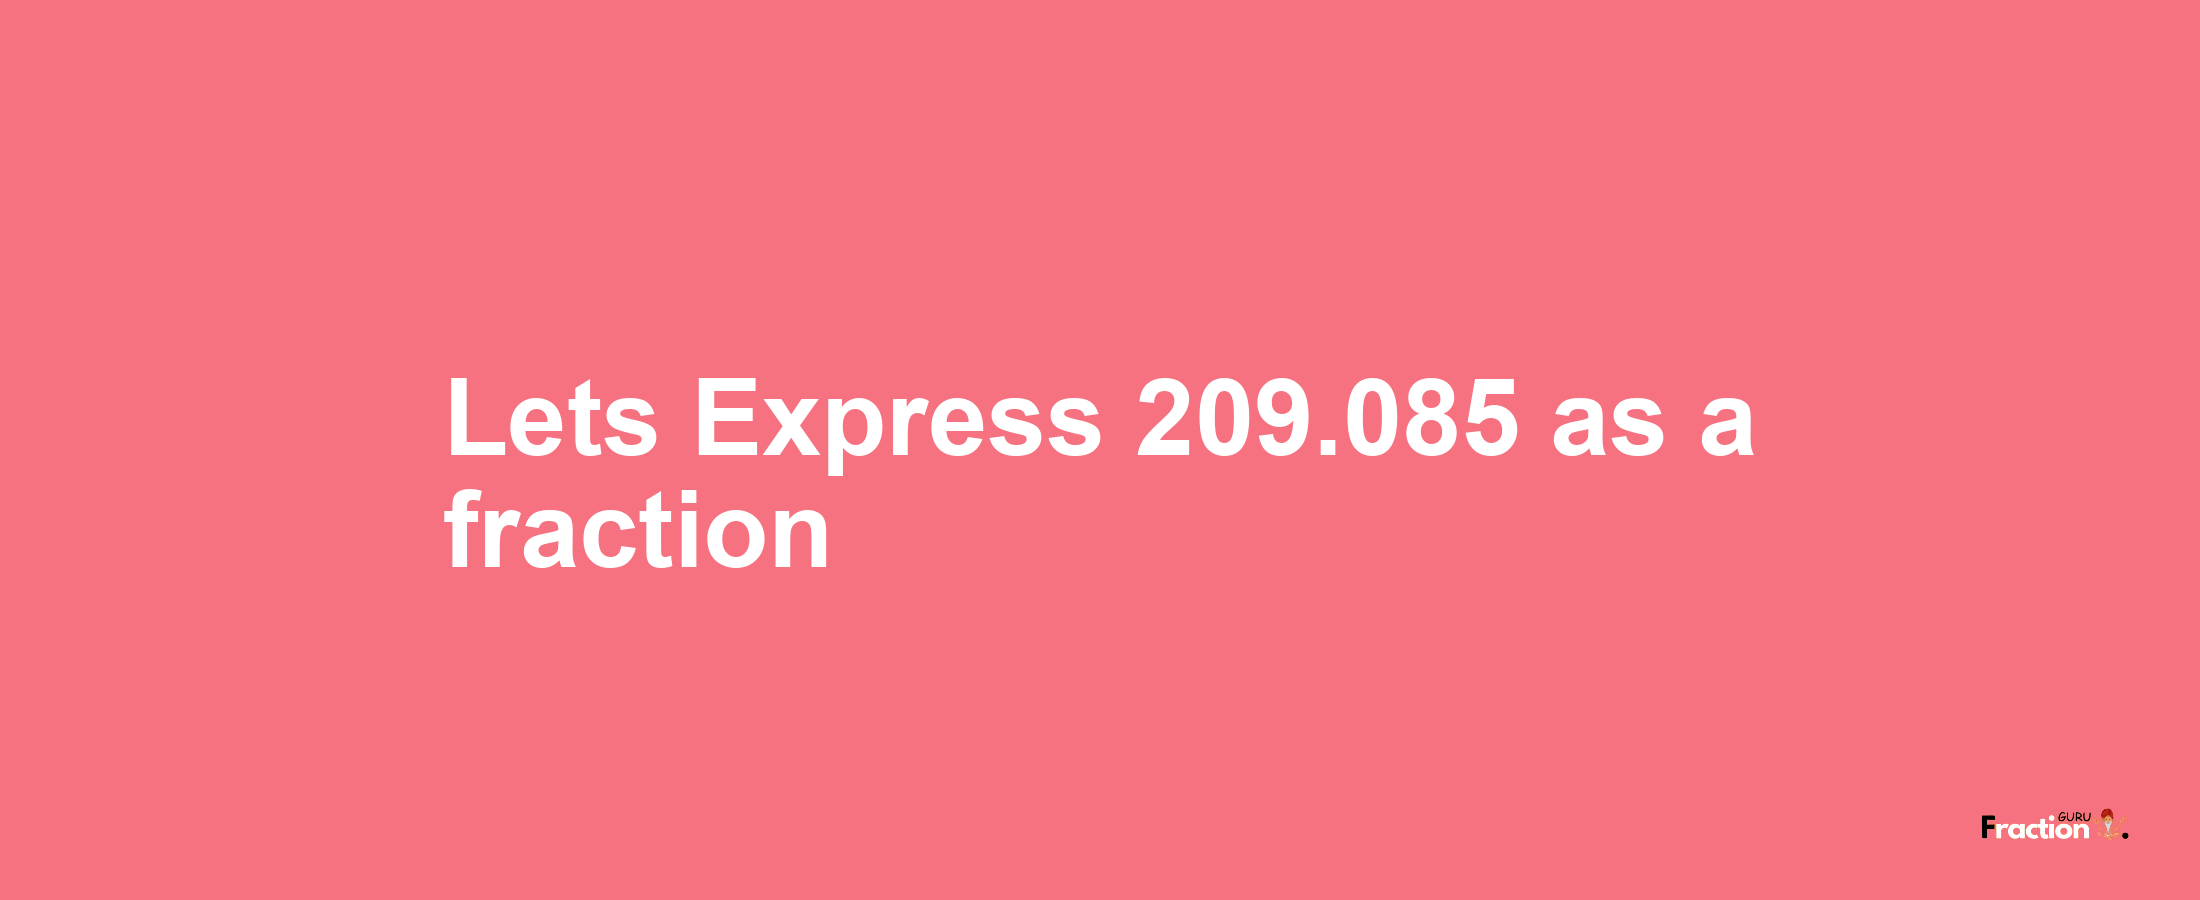 Lets Express 209.085 as afraction